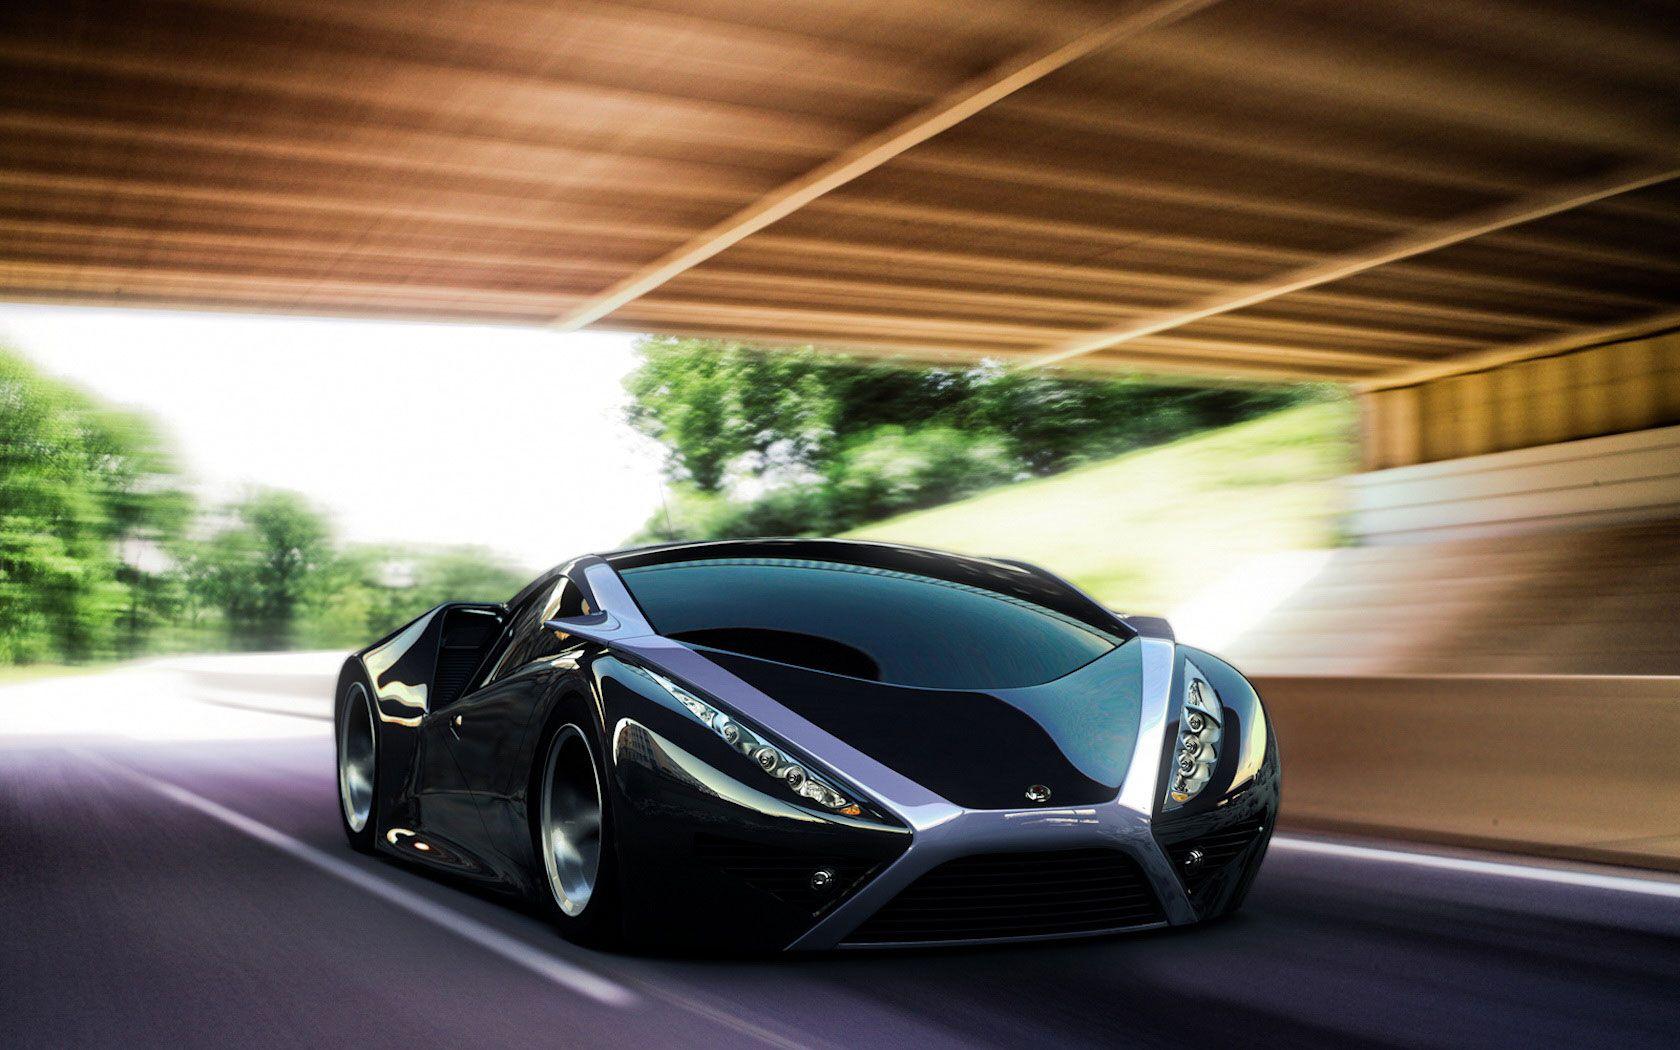 Free Awesome Cool Car Wallpaper Widescreen High Quality Cars On